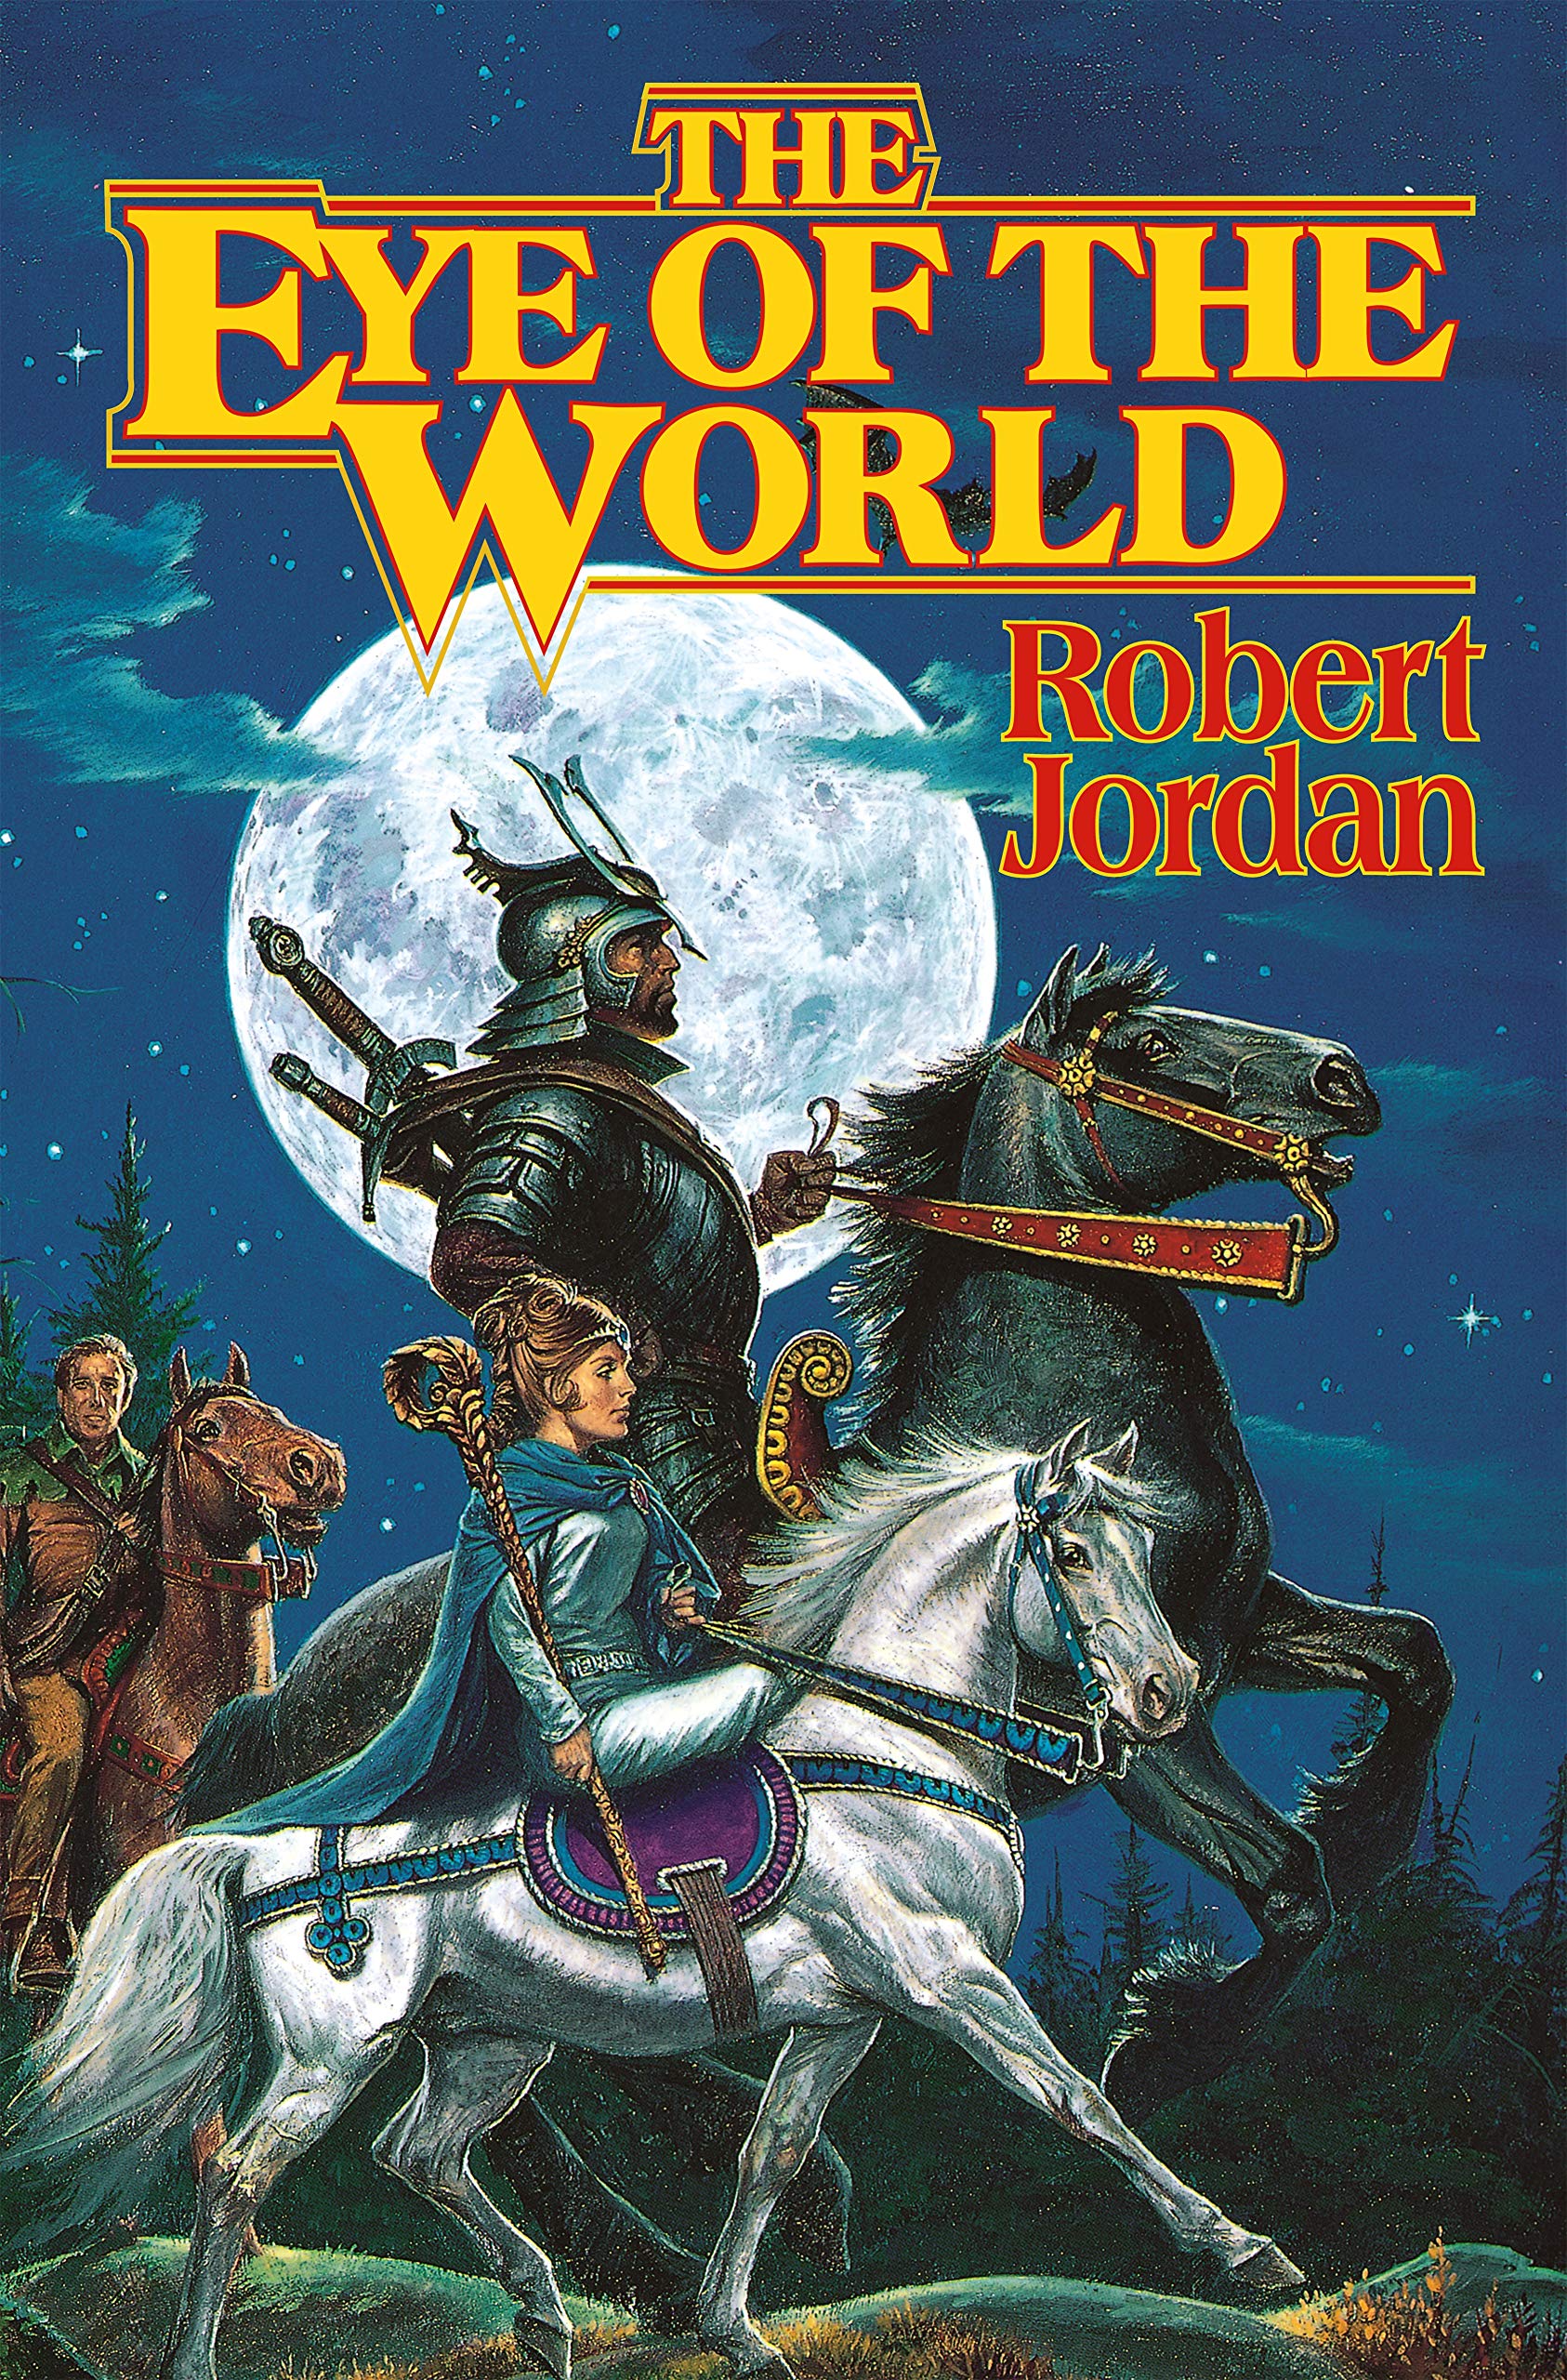 The Wheel of Time (book series) .